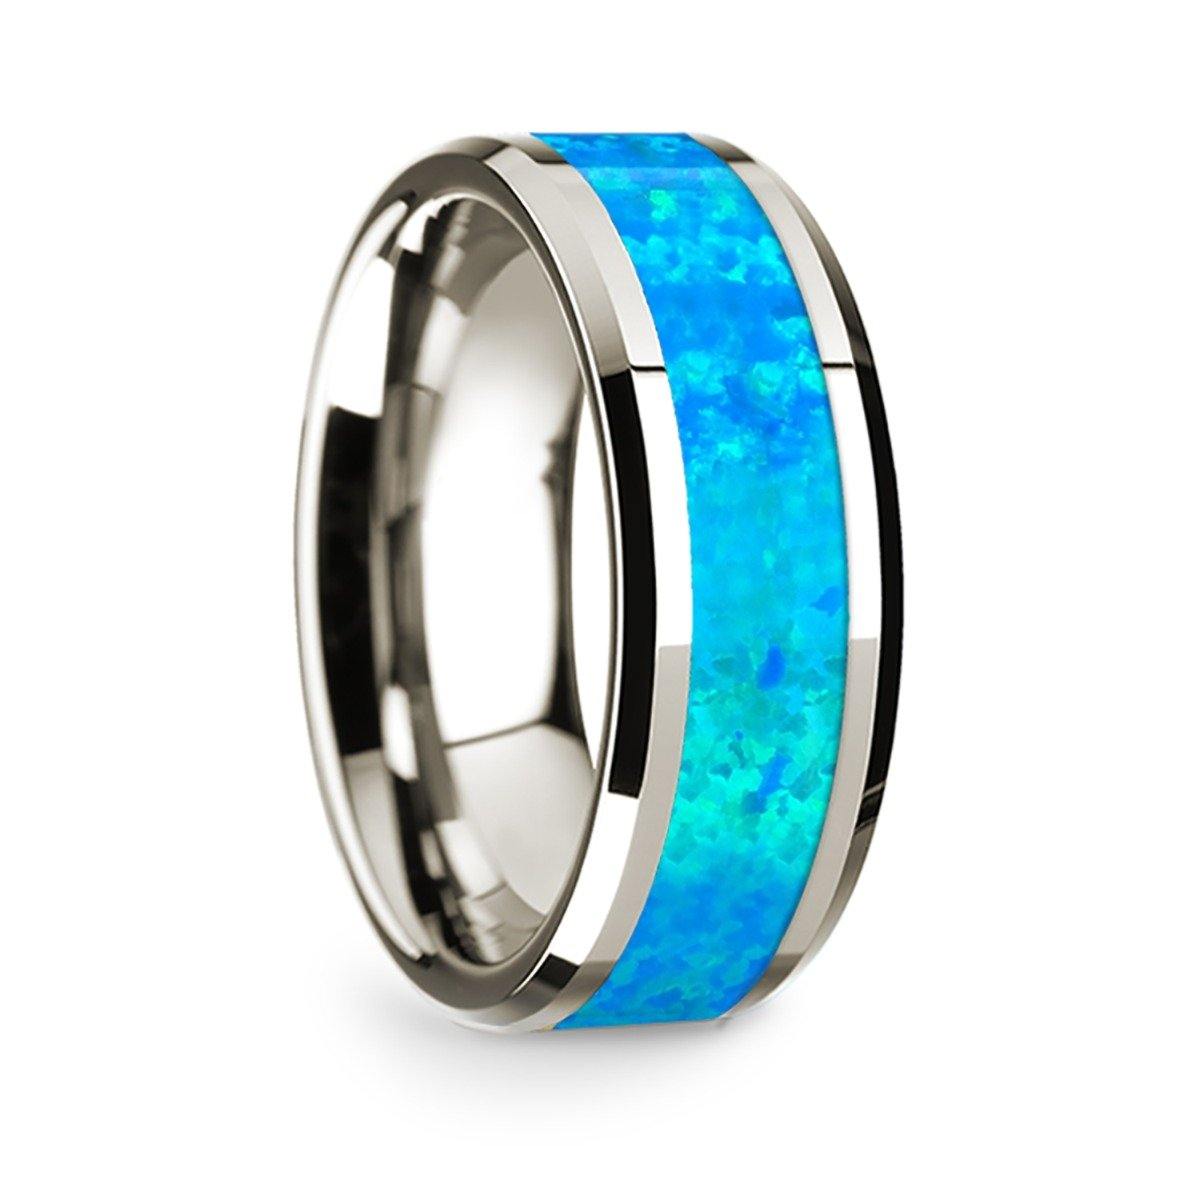 INSPIRE - 14k White Gold Polished Beveled Edges Wedding Ring with Blue Opal Inlay - 8 mm - The Rutile Ltd